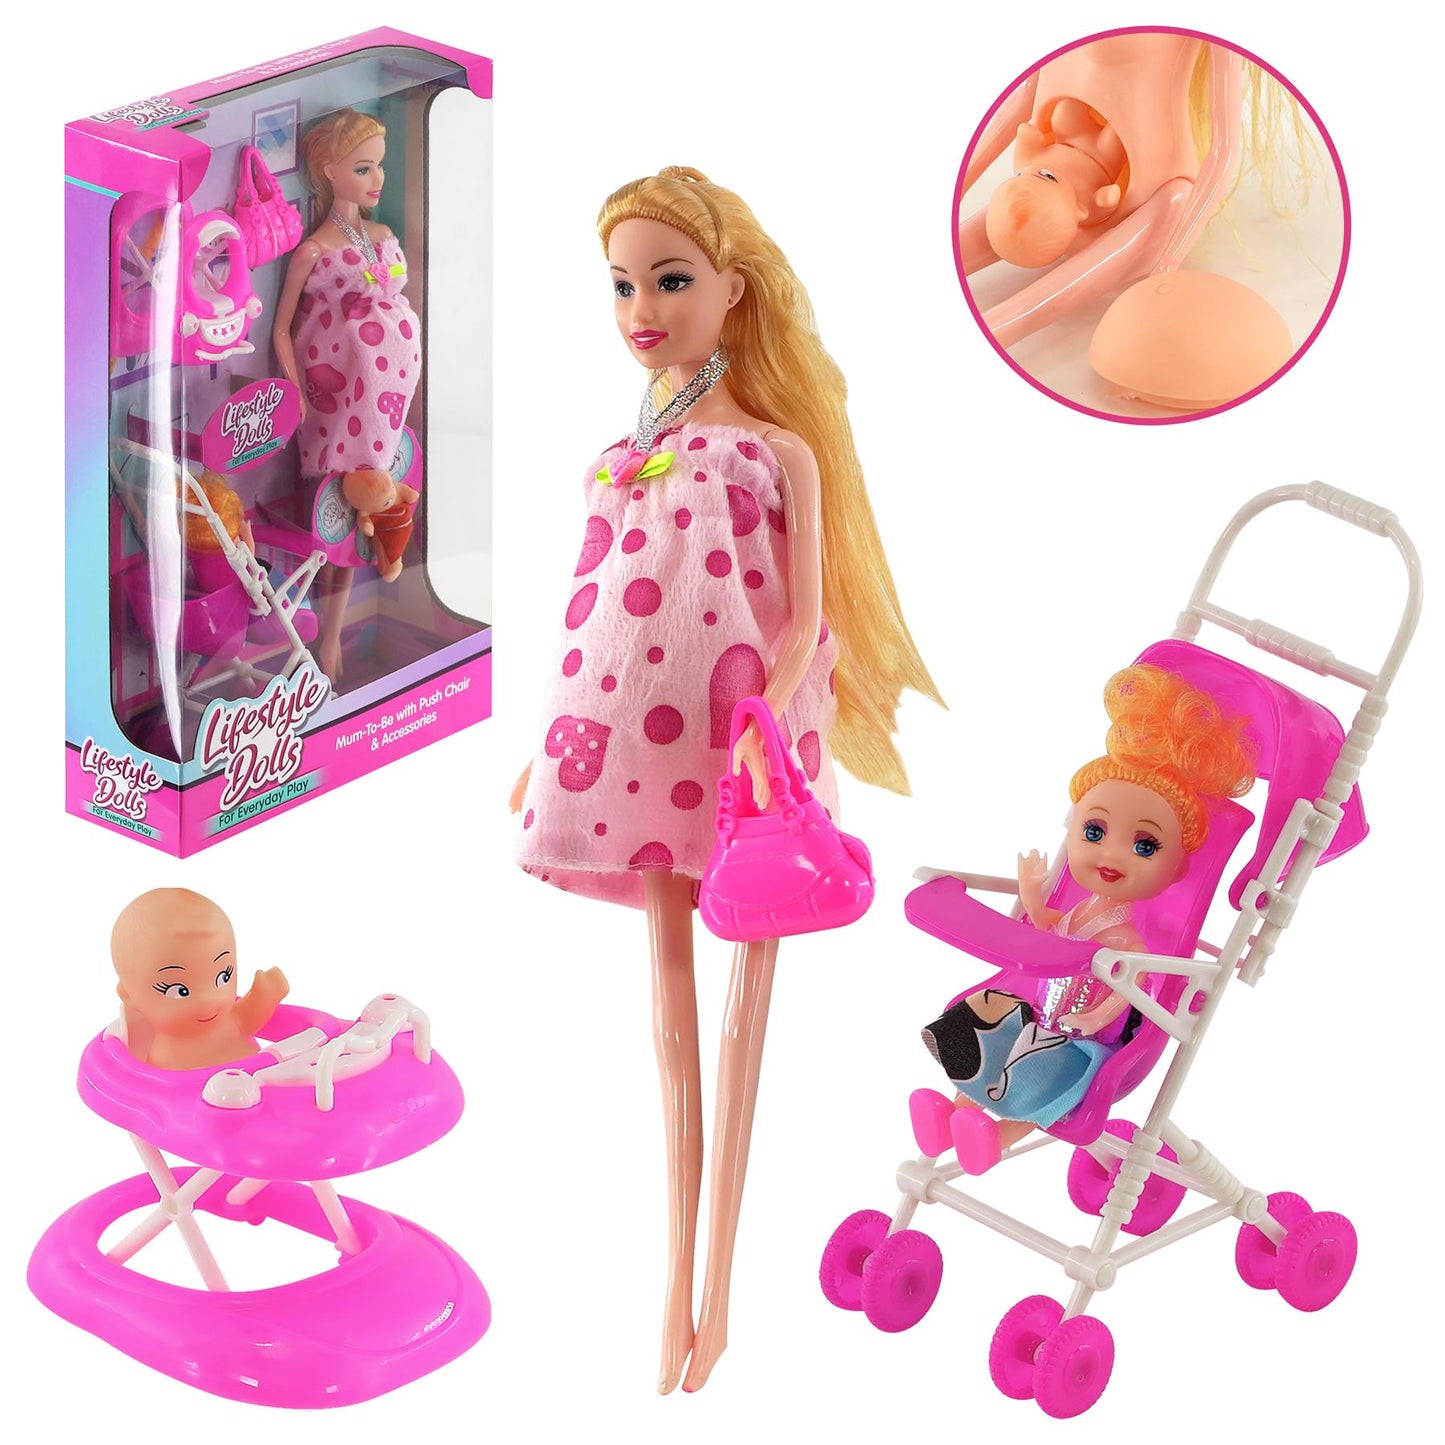 Pregnant Baby Doll with Accessories by BiBi Doll - UKBuyZone